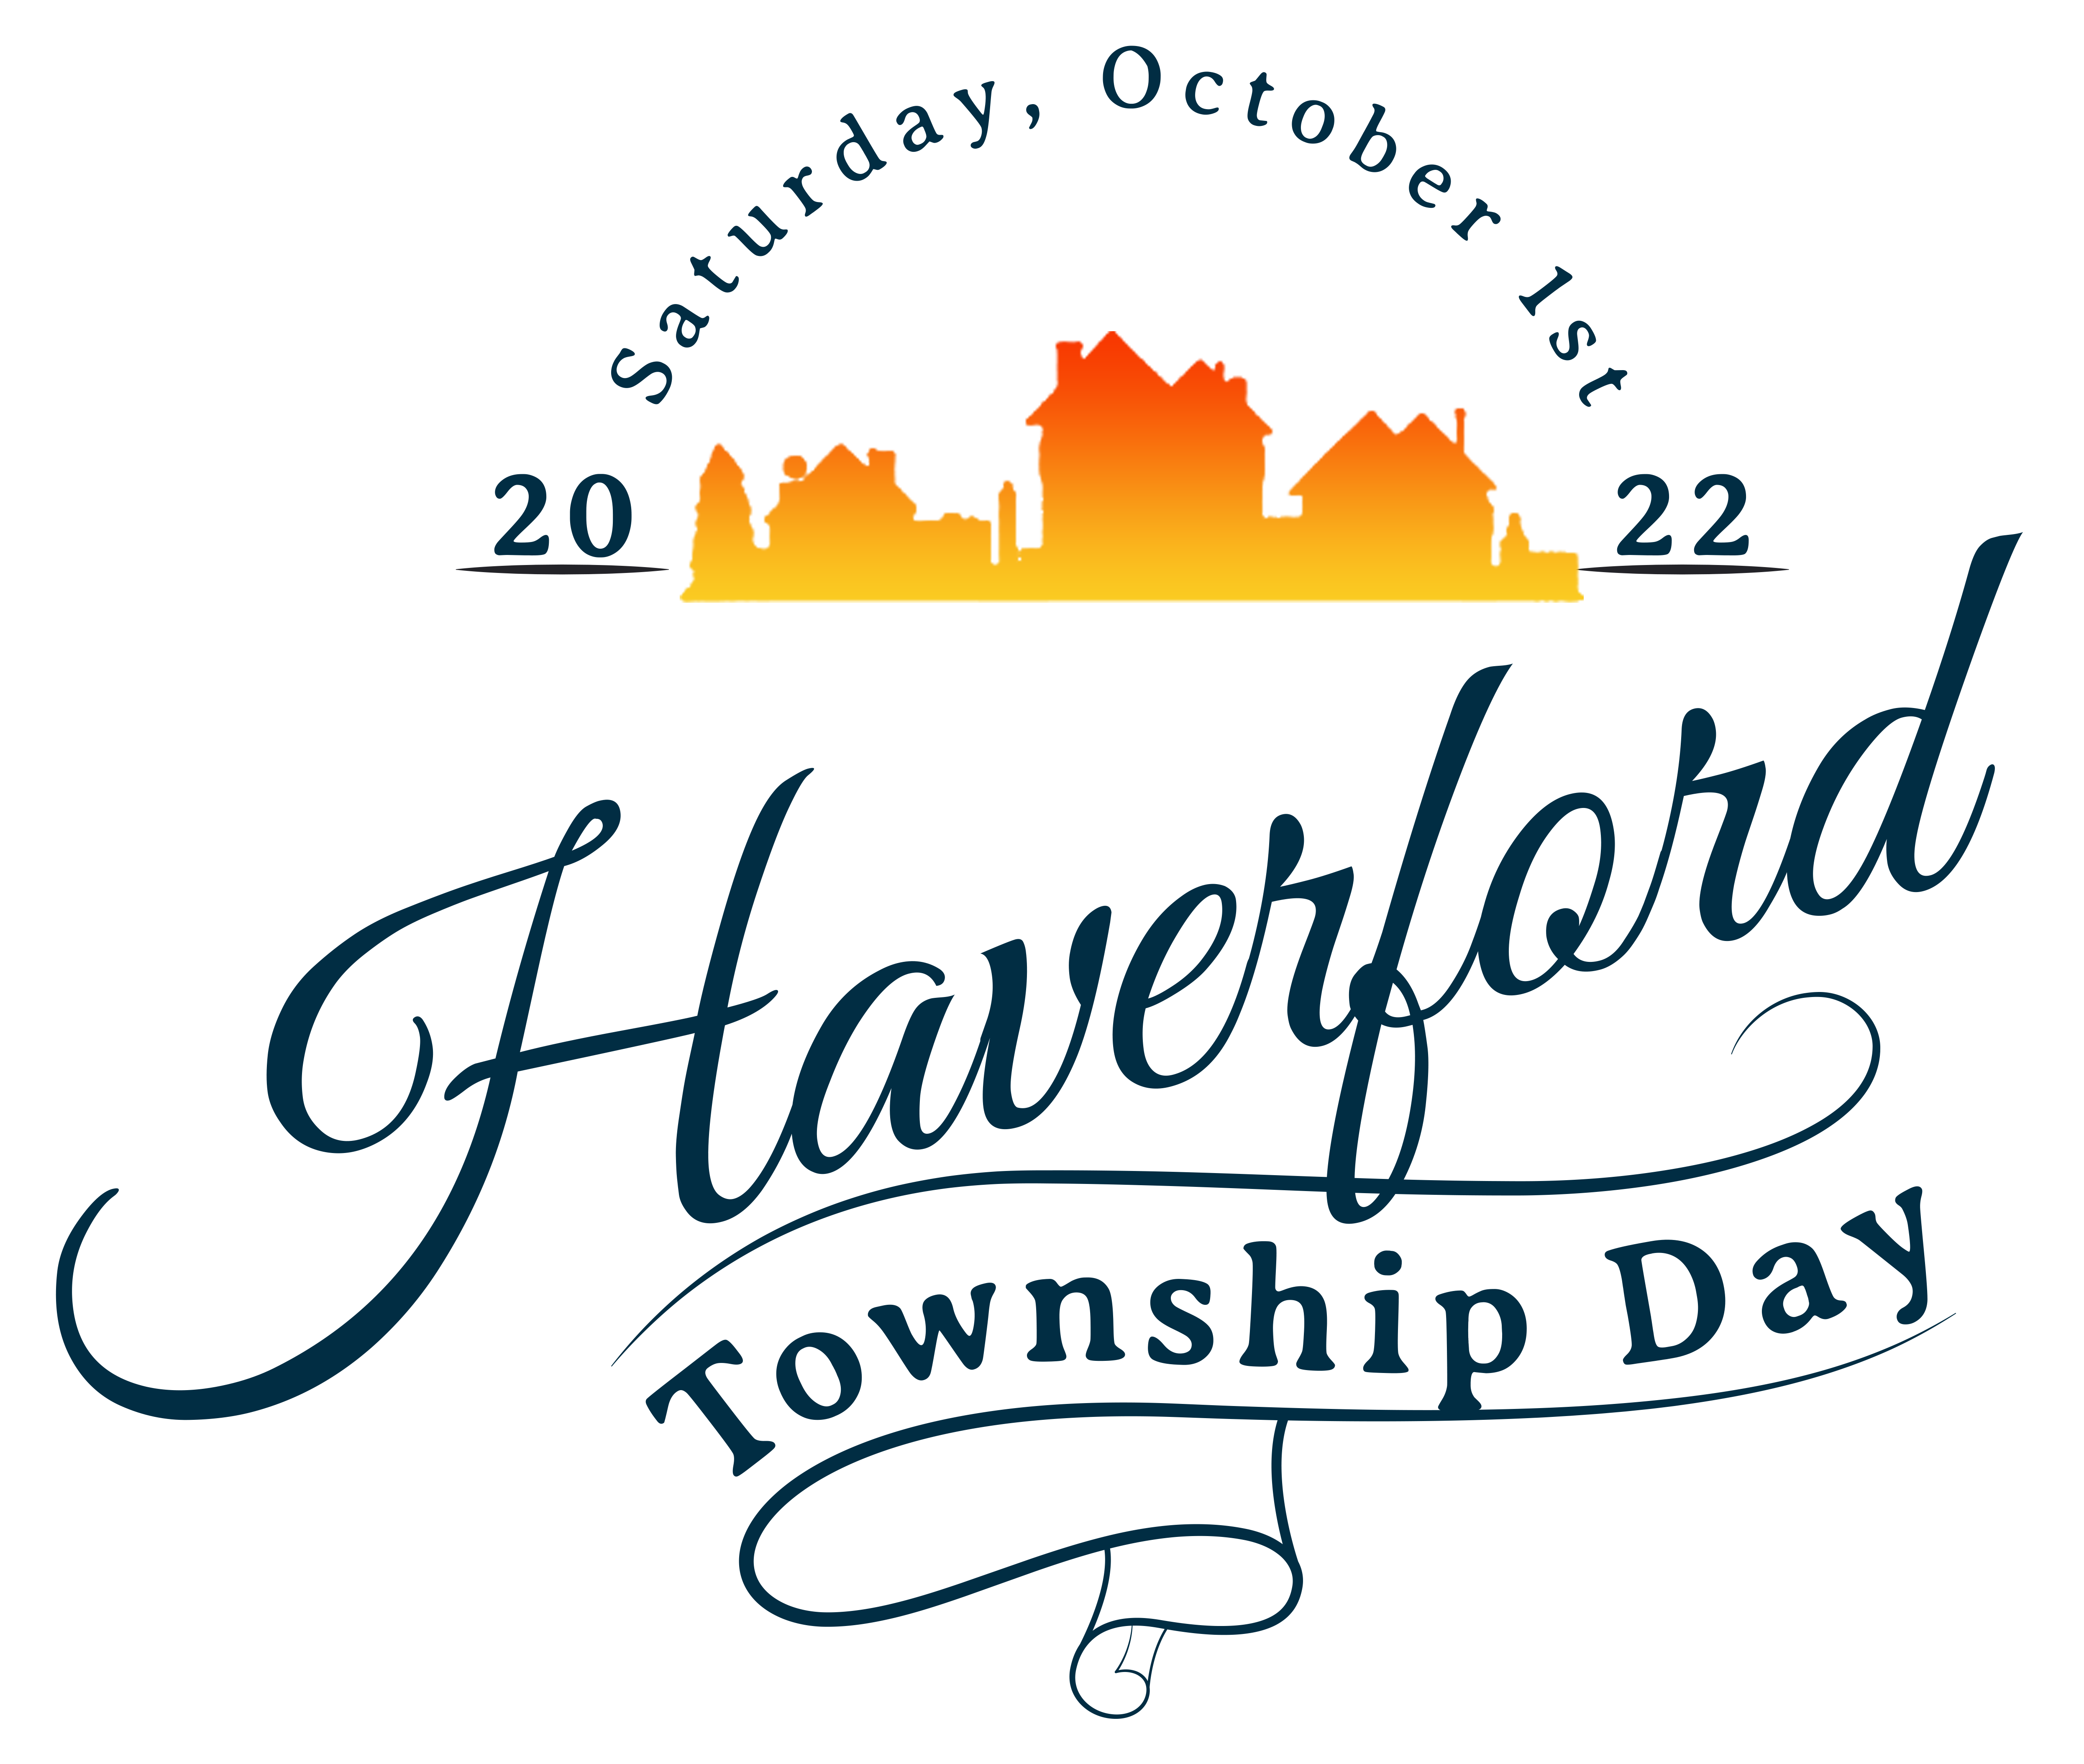 Haverford Township Day | The Township of Haverford, PA